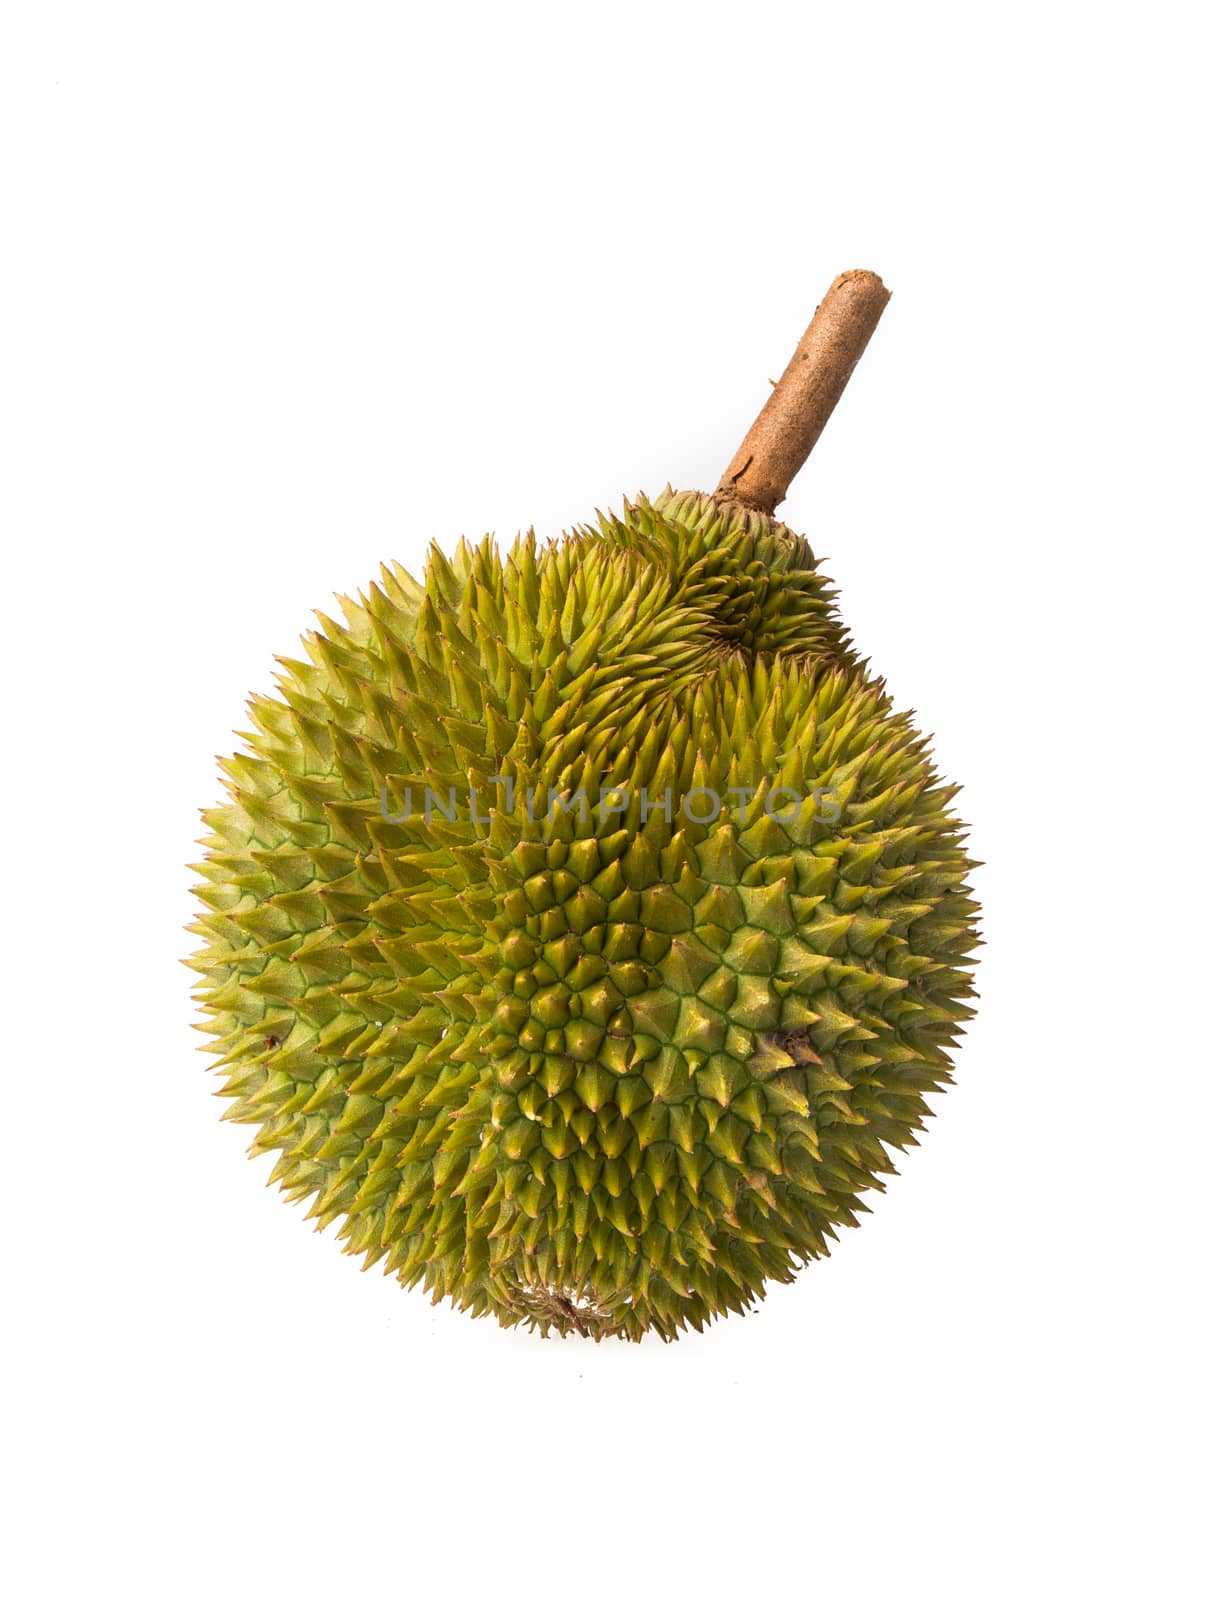 Durian  by tehcheesiong